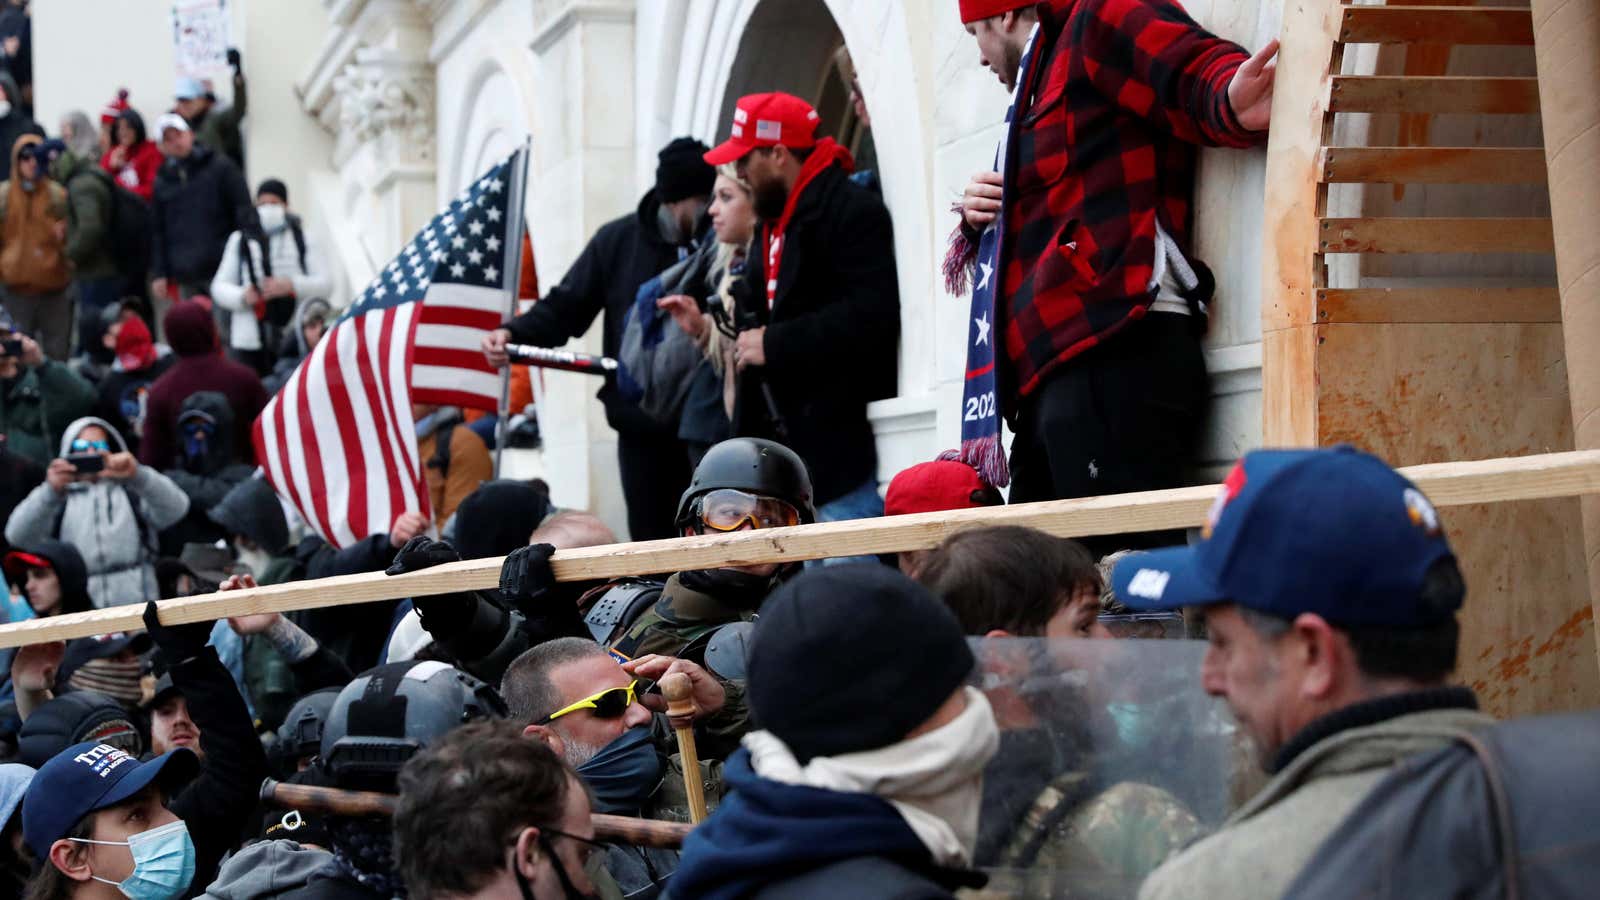 Pro-Trump protesters stormed the US Capitol during a rally to contest the certification of the presidential election results.